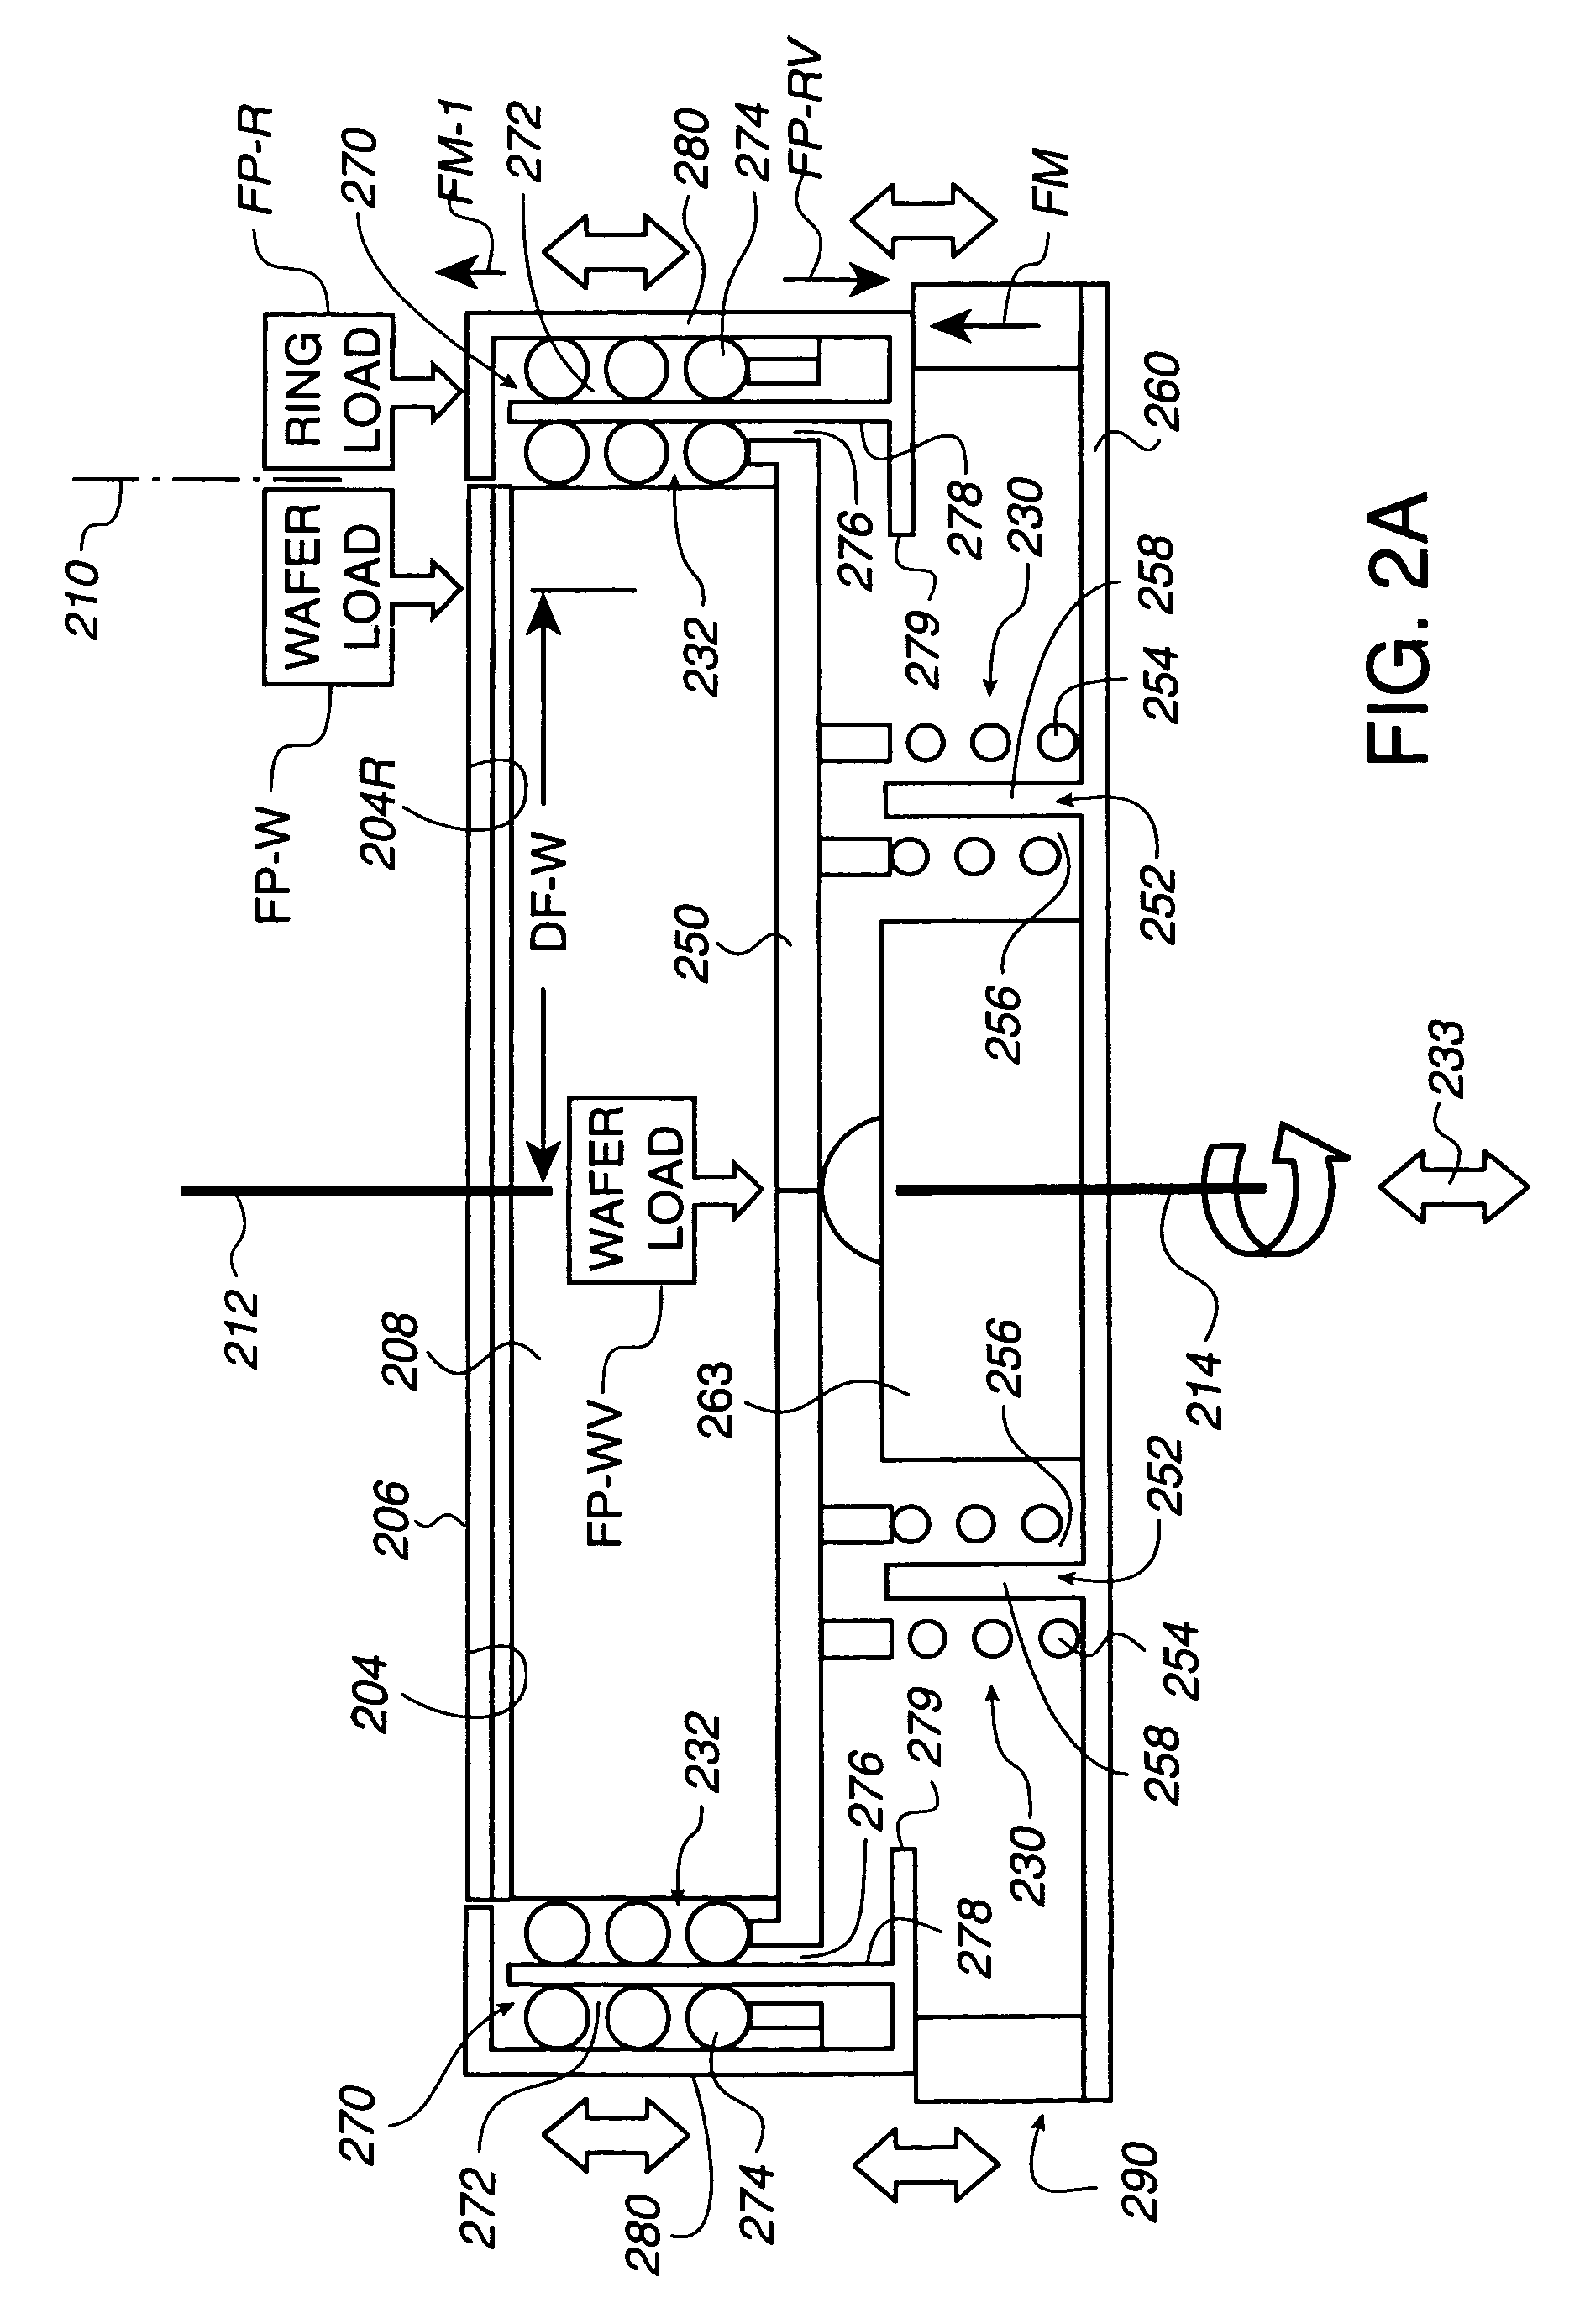 Apparatus for controlling retaining ring and wafer head tilt for chemical mechanical polishing